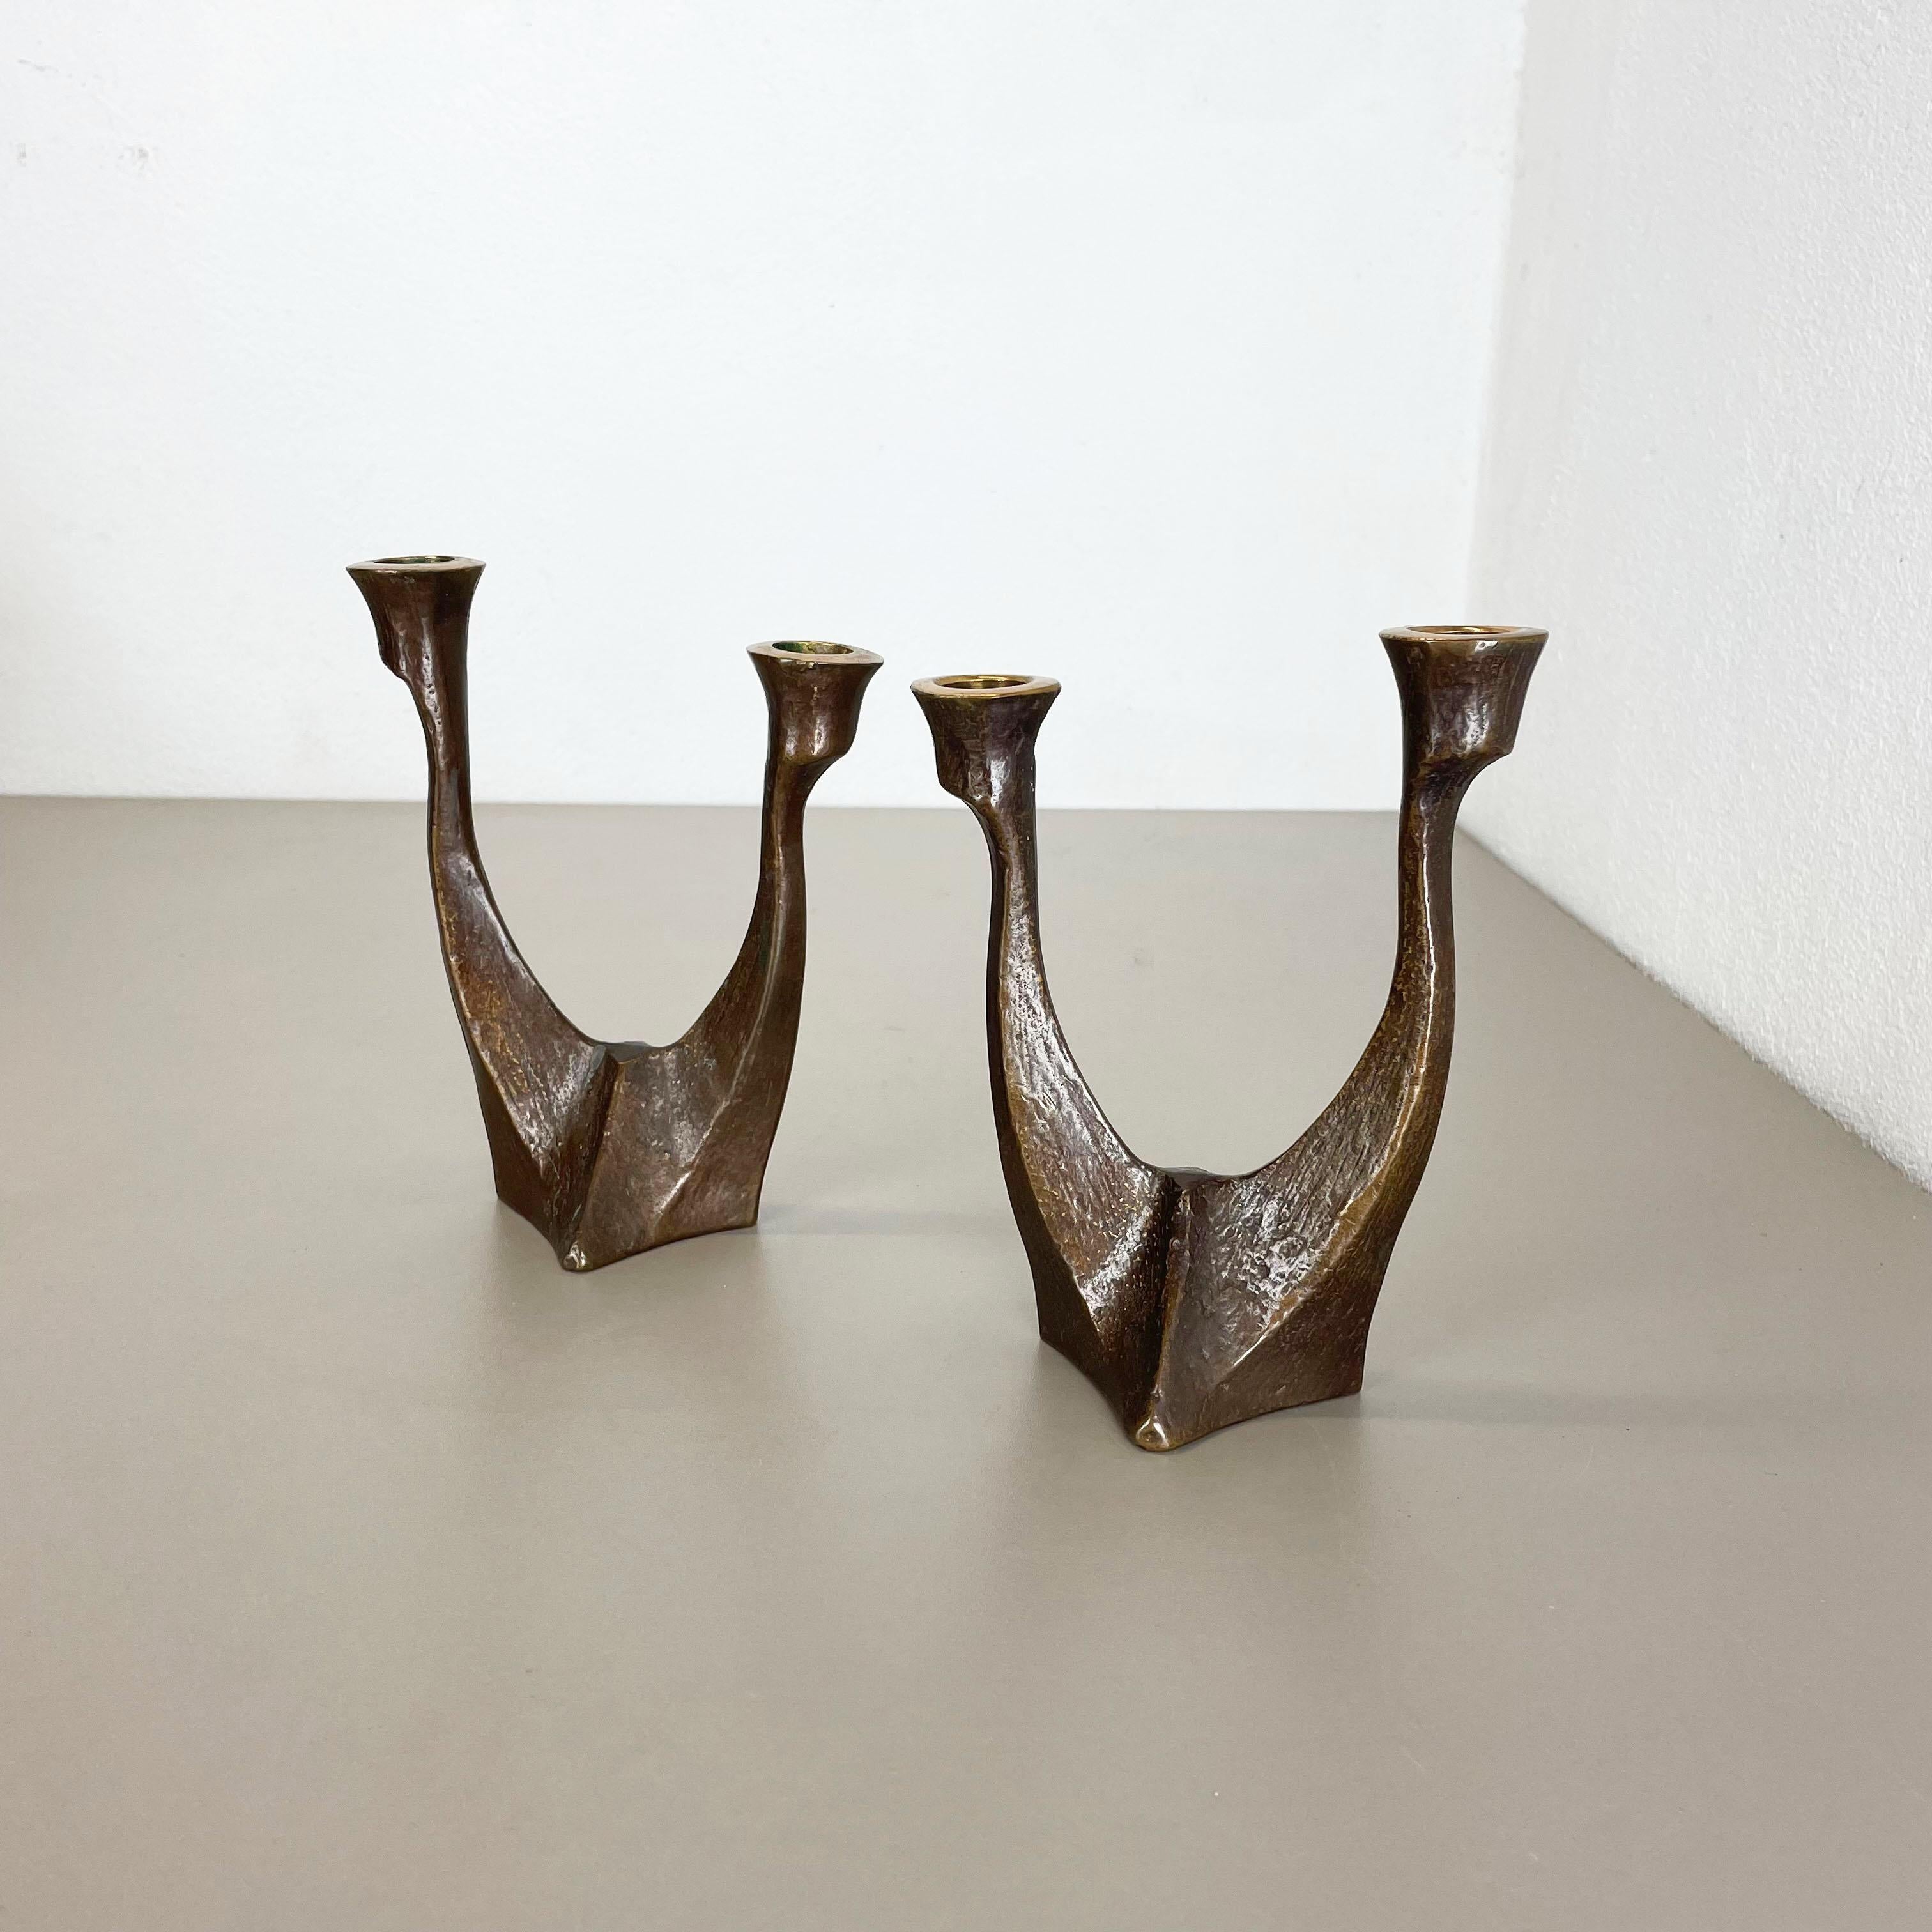 Article: Brutalist candleholder, set of 2

Origin: Germany

Design producer: Michael Harjes

Material: bronze

Decade: 1960s

Description: This original vintage candleholder set, was produced in the 1960s in Germany. Designed and executed by Michael